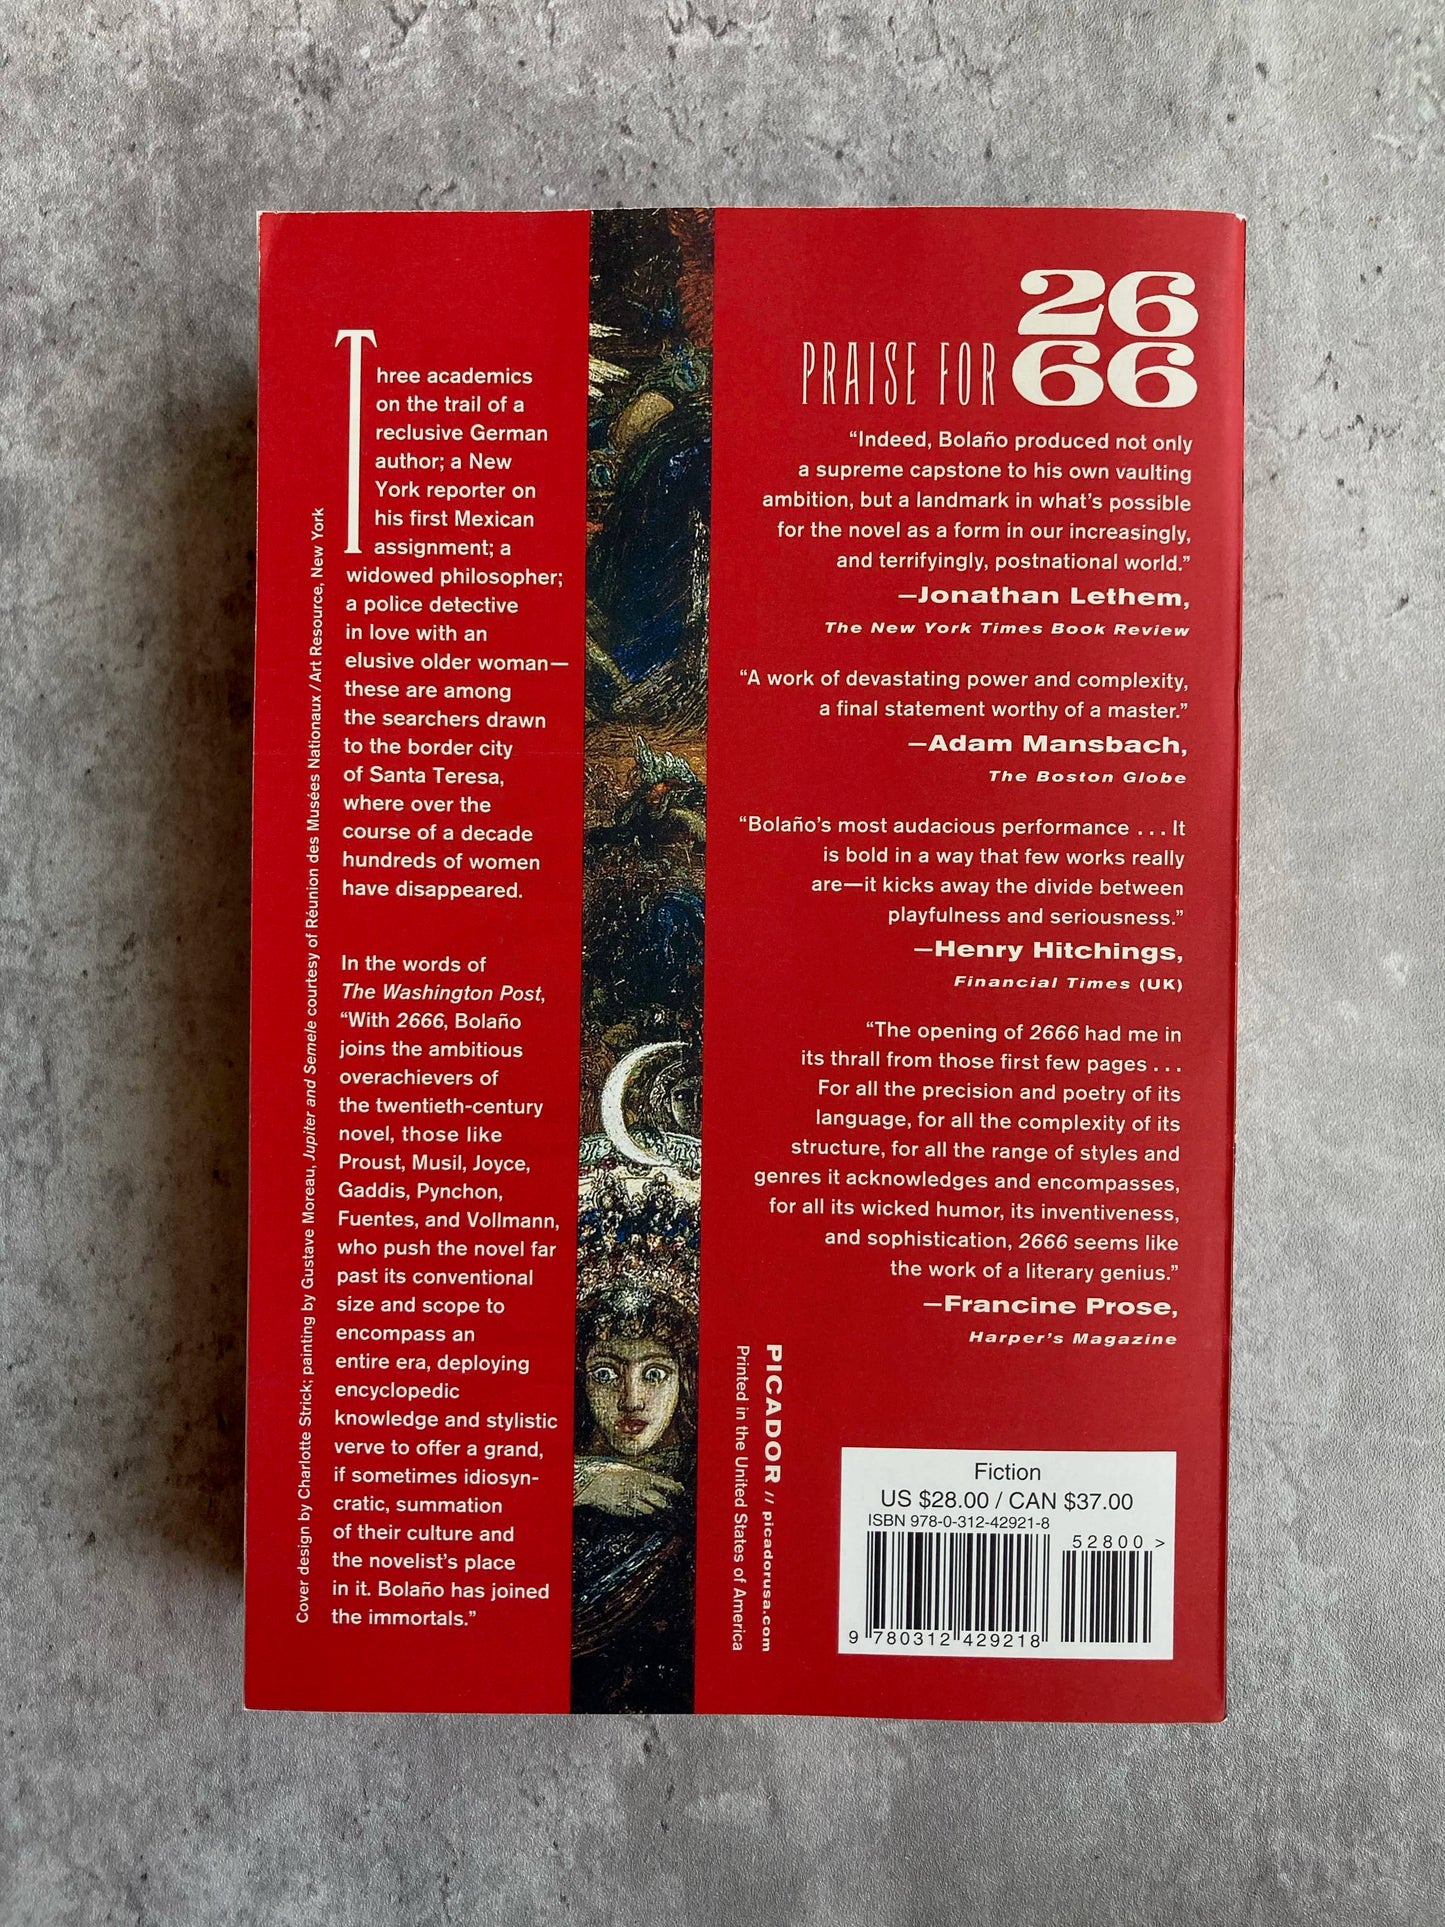 Back cover of Roberto Bolano's 2666. Shop for books with The Stone Circle, the only online bookstore near you.